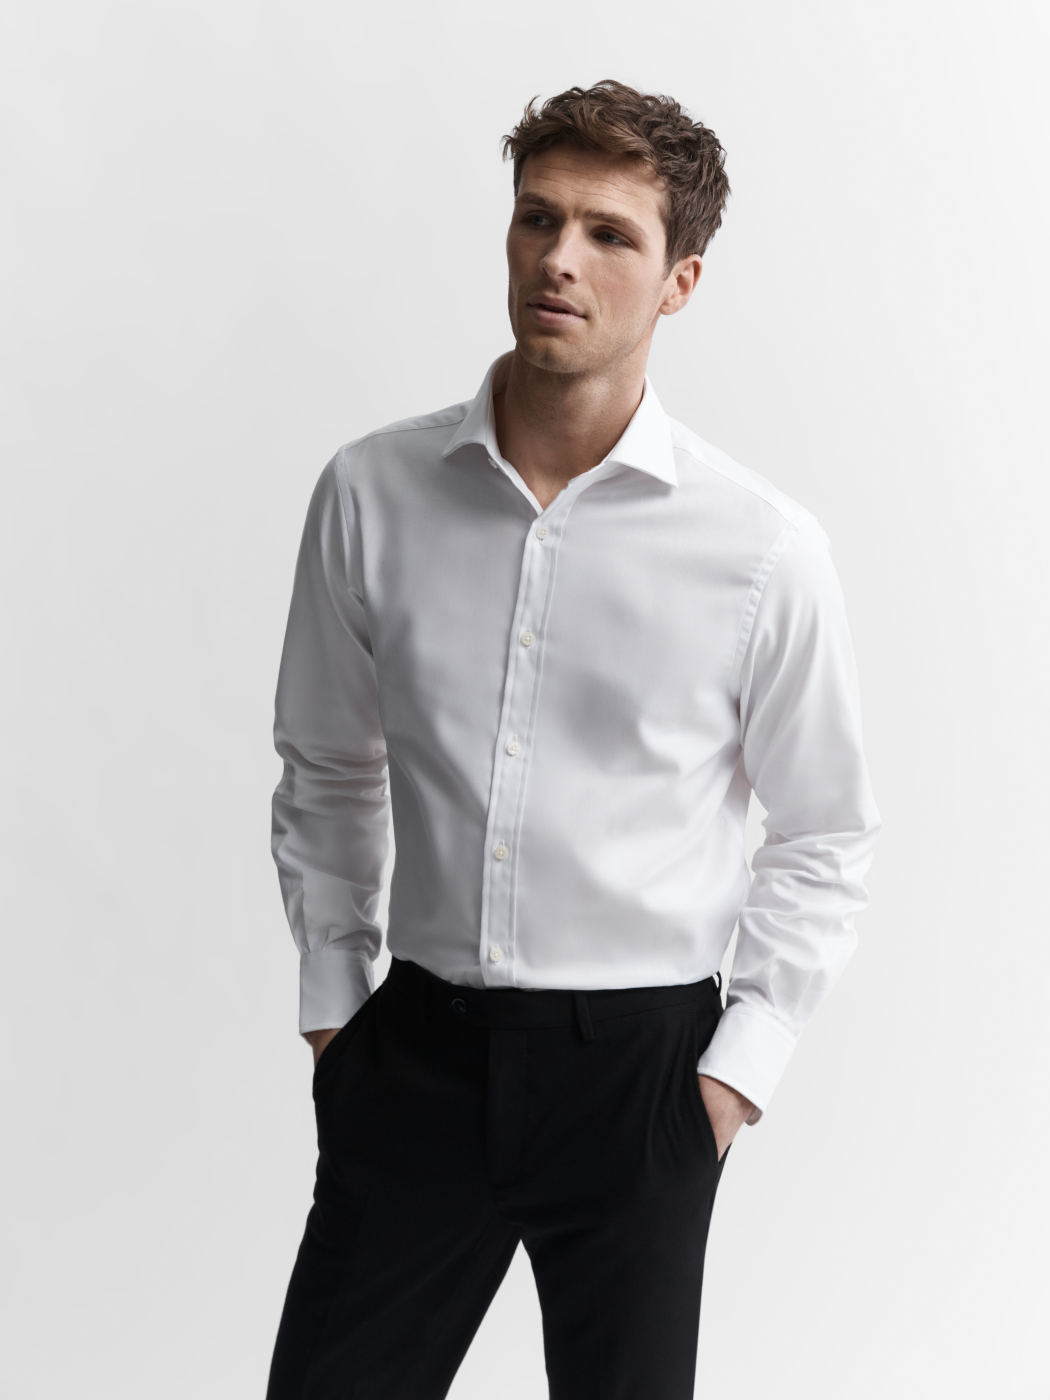 Image 2 of Easy To Iron White Plain Twill Stretch Regular Fit Single Cuff Classic Collar Shirt